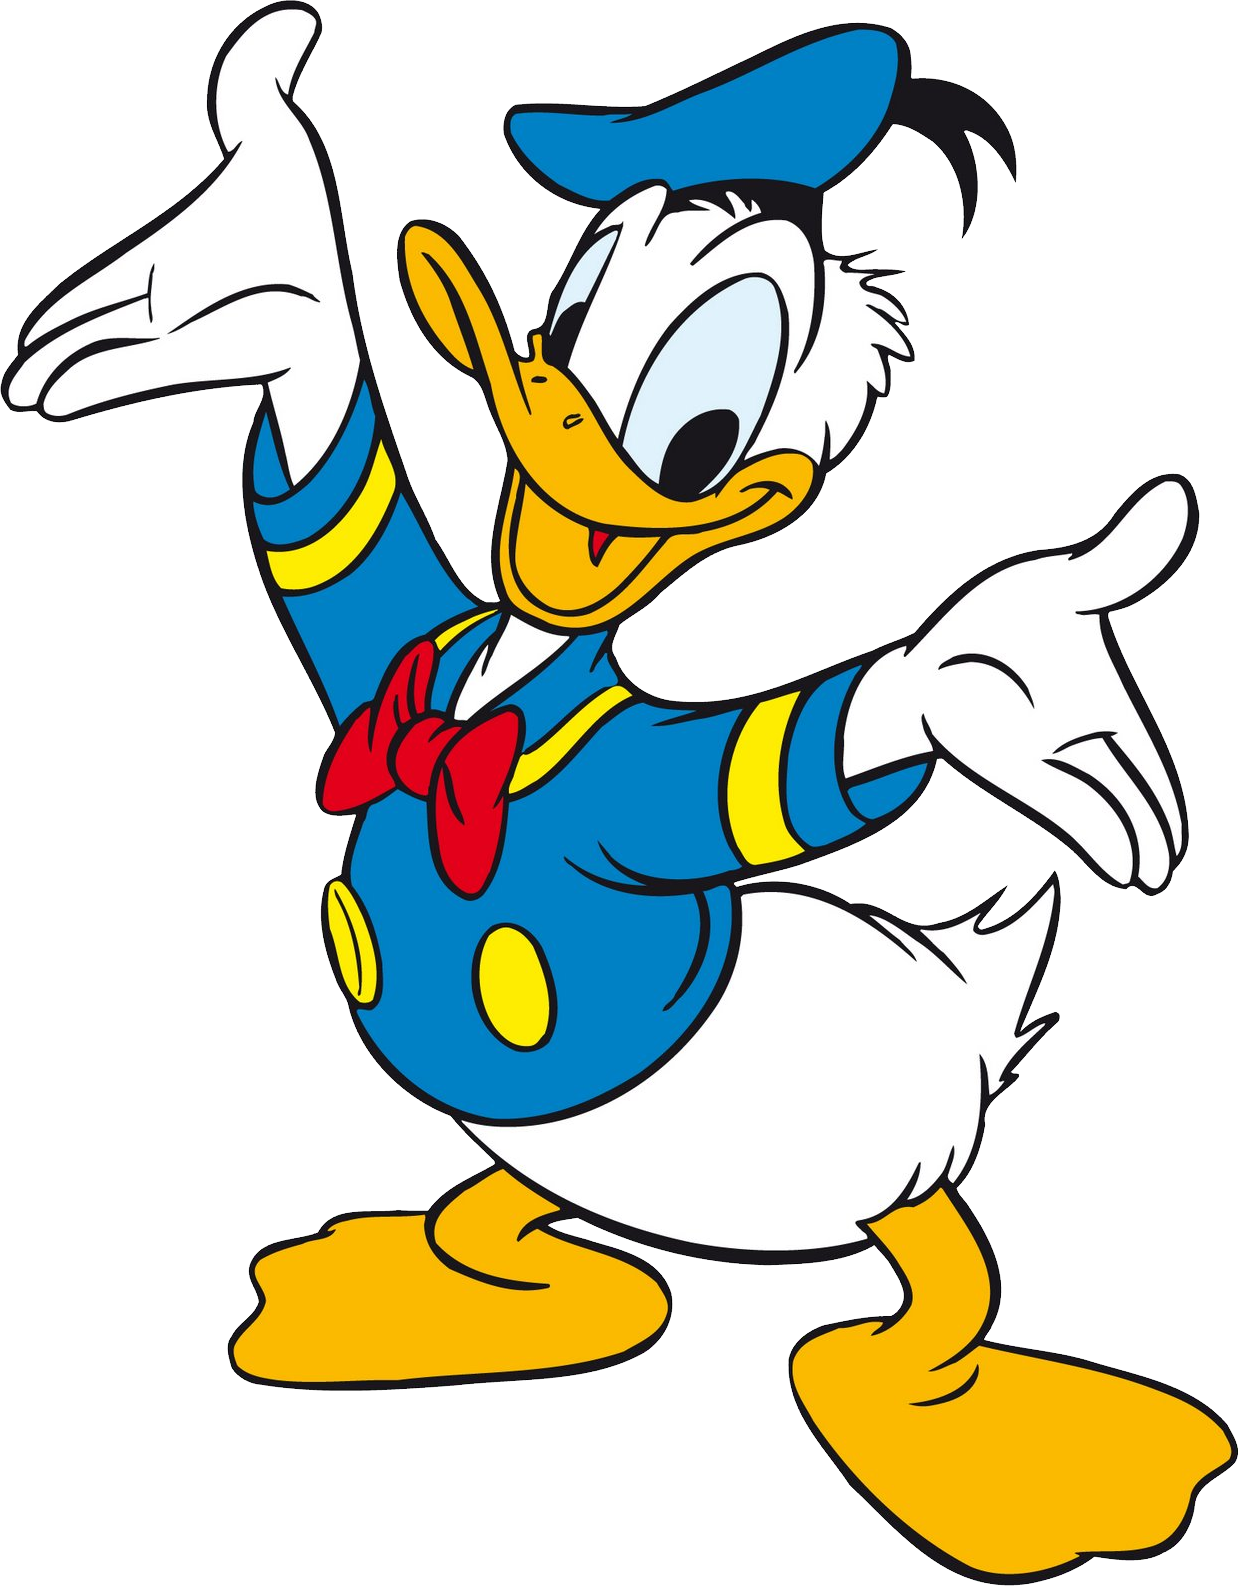 Donald Duck Character PNG HD Quality